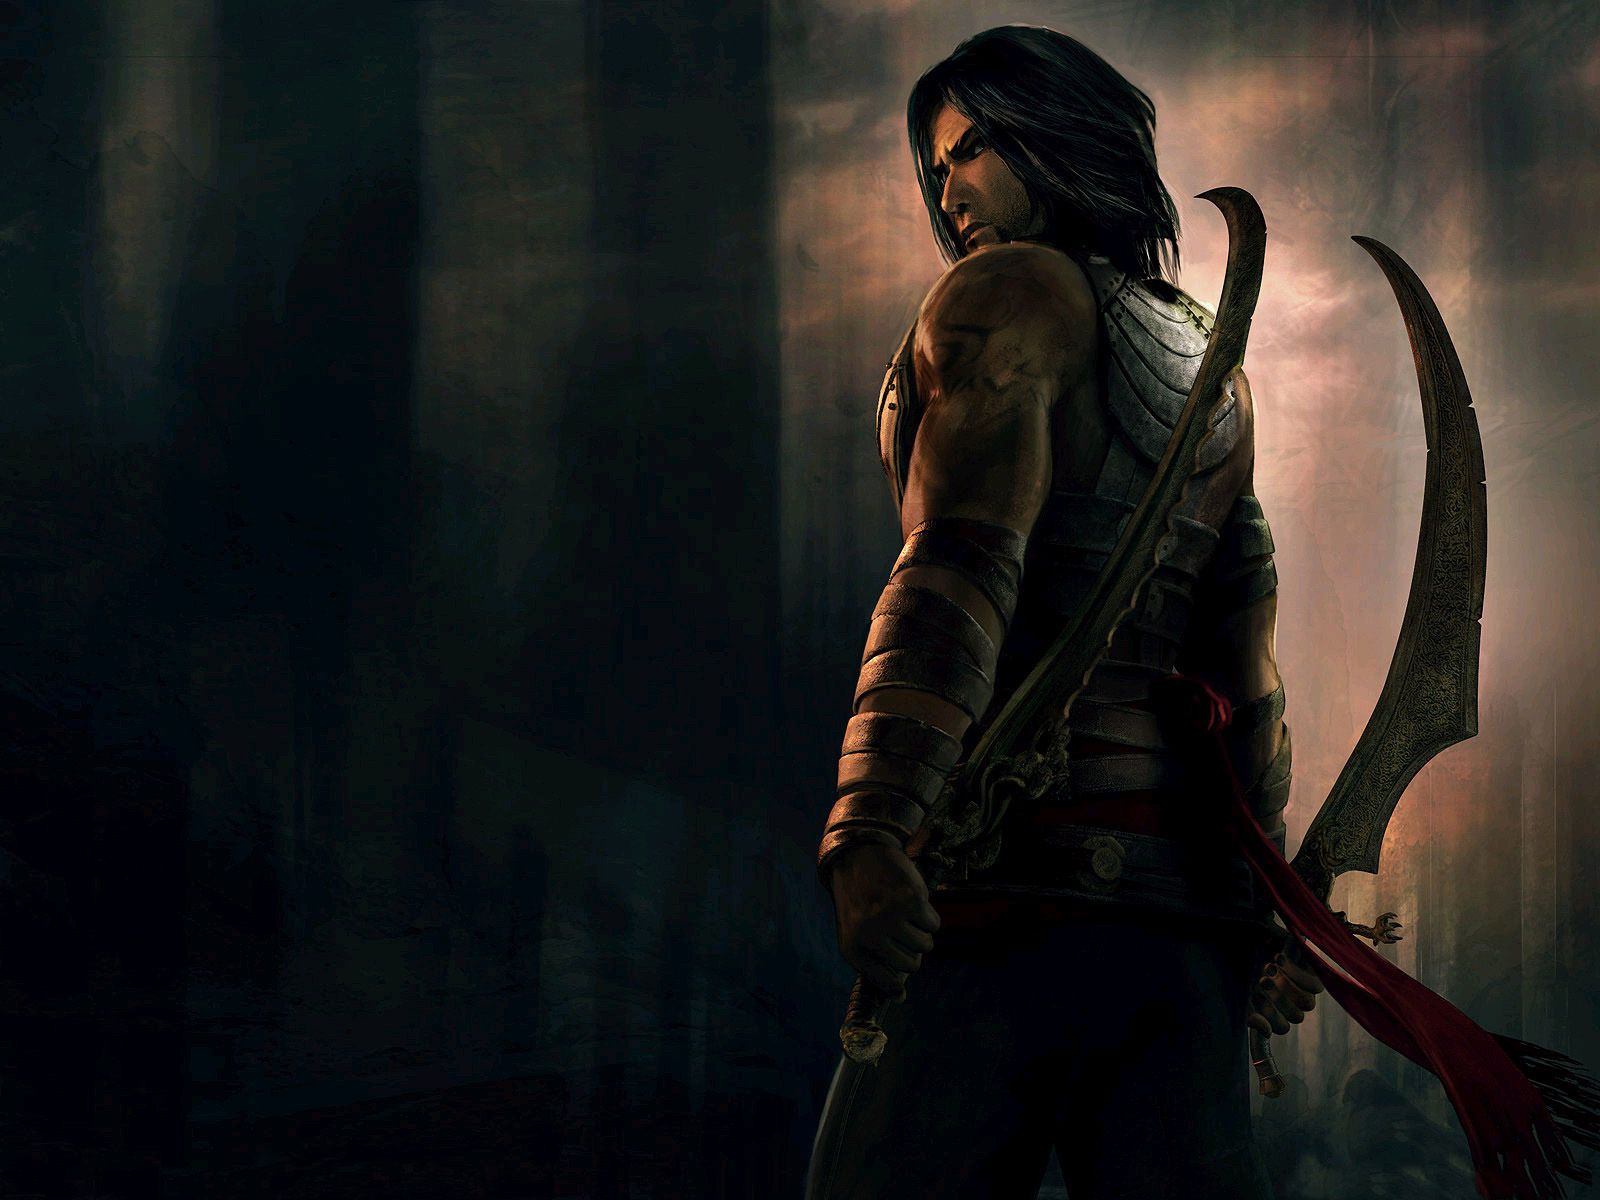 Prince Of Persia: Warrior Within Backgrounds, Compatible - PC, Mobile, Gadgets| 1600x1200 px